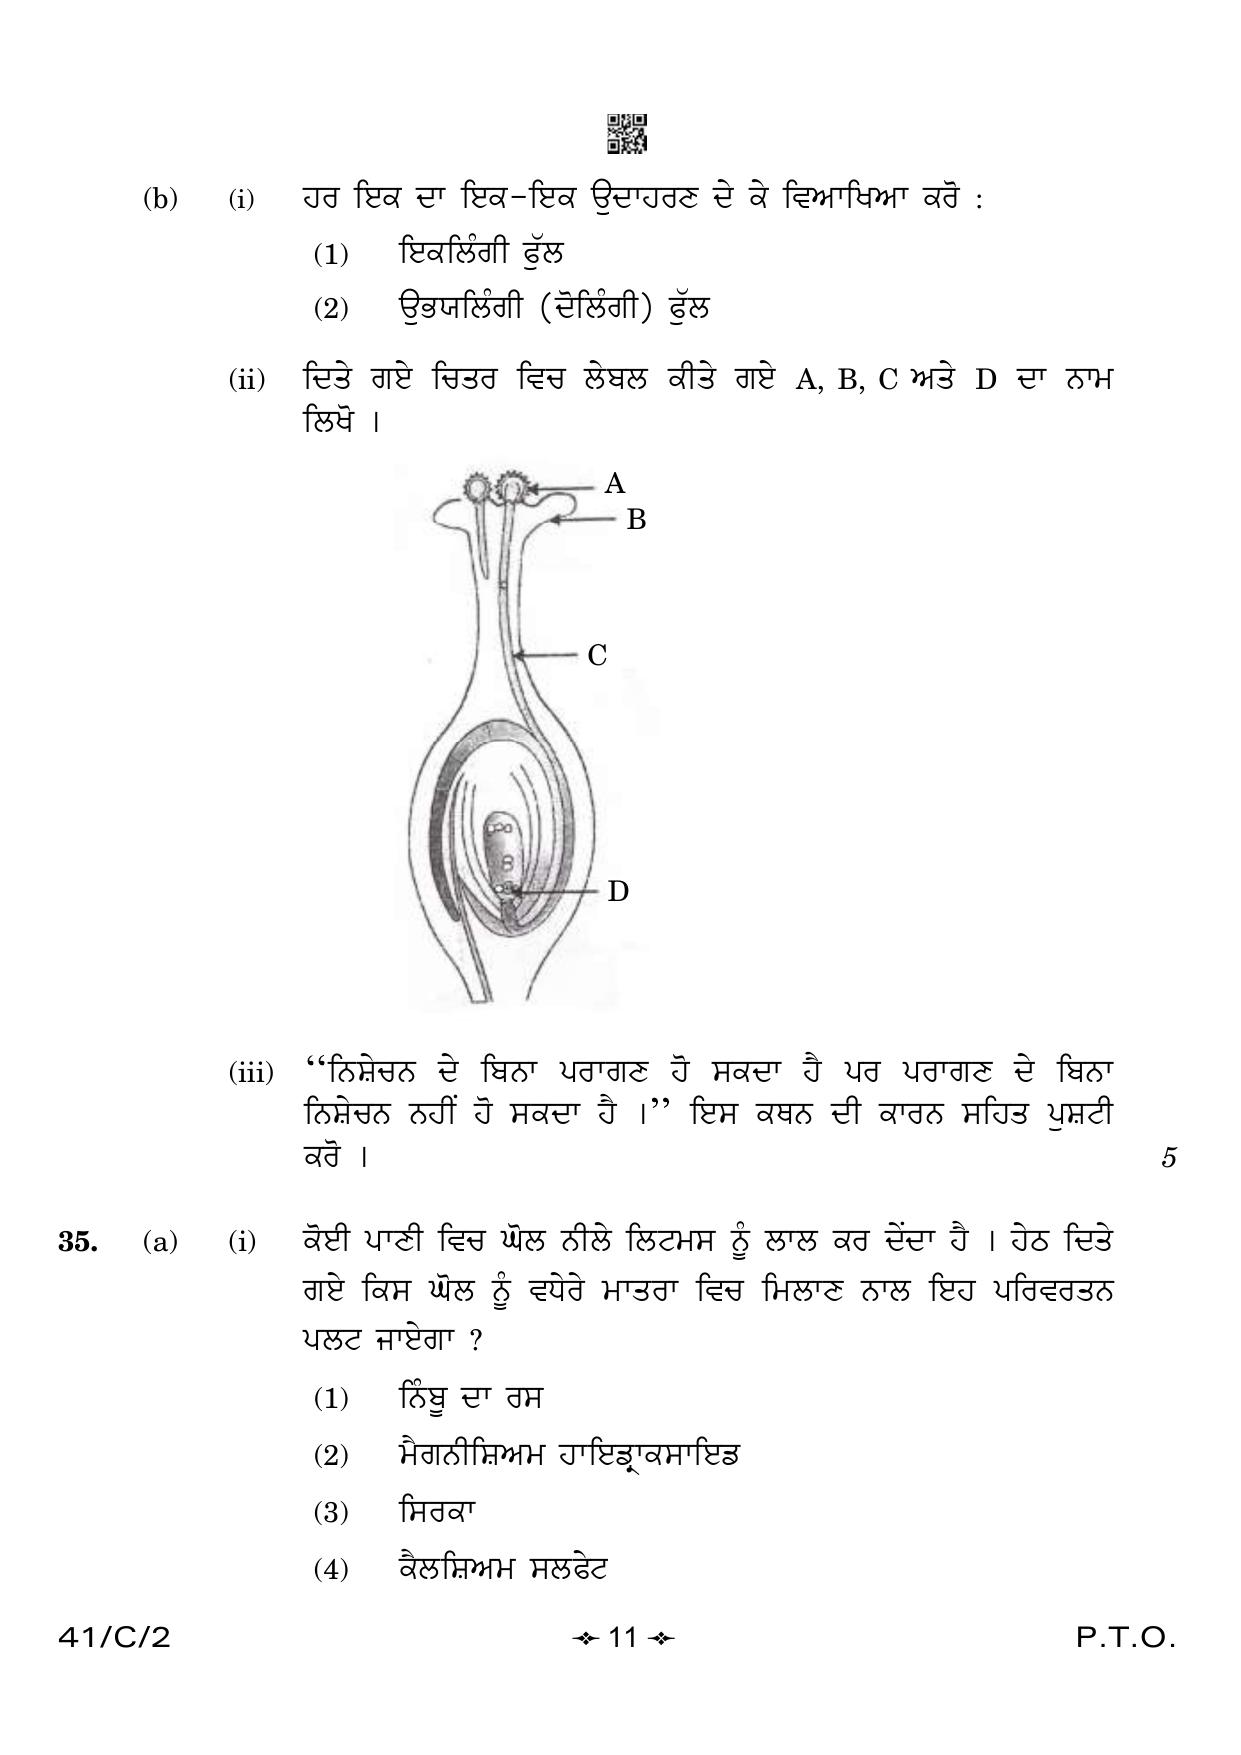 CBSE Class 10 41-2 Science Punjabi 2023 (Compartment) Question Paper - Page 11